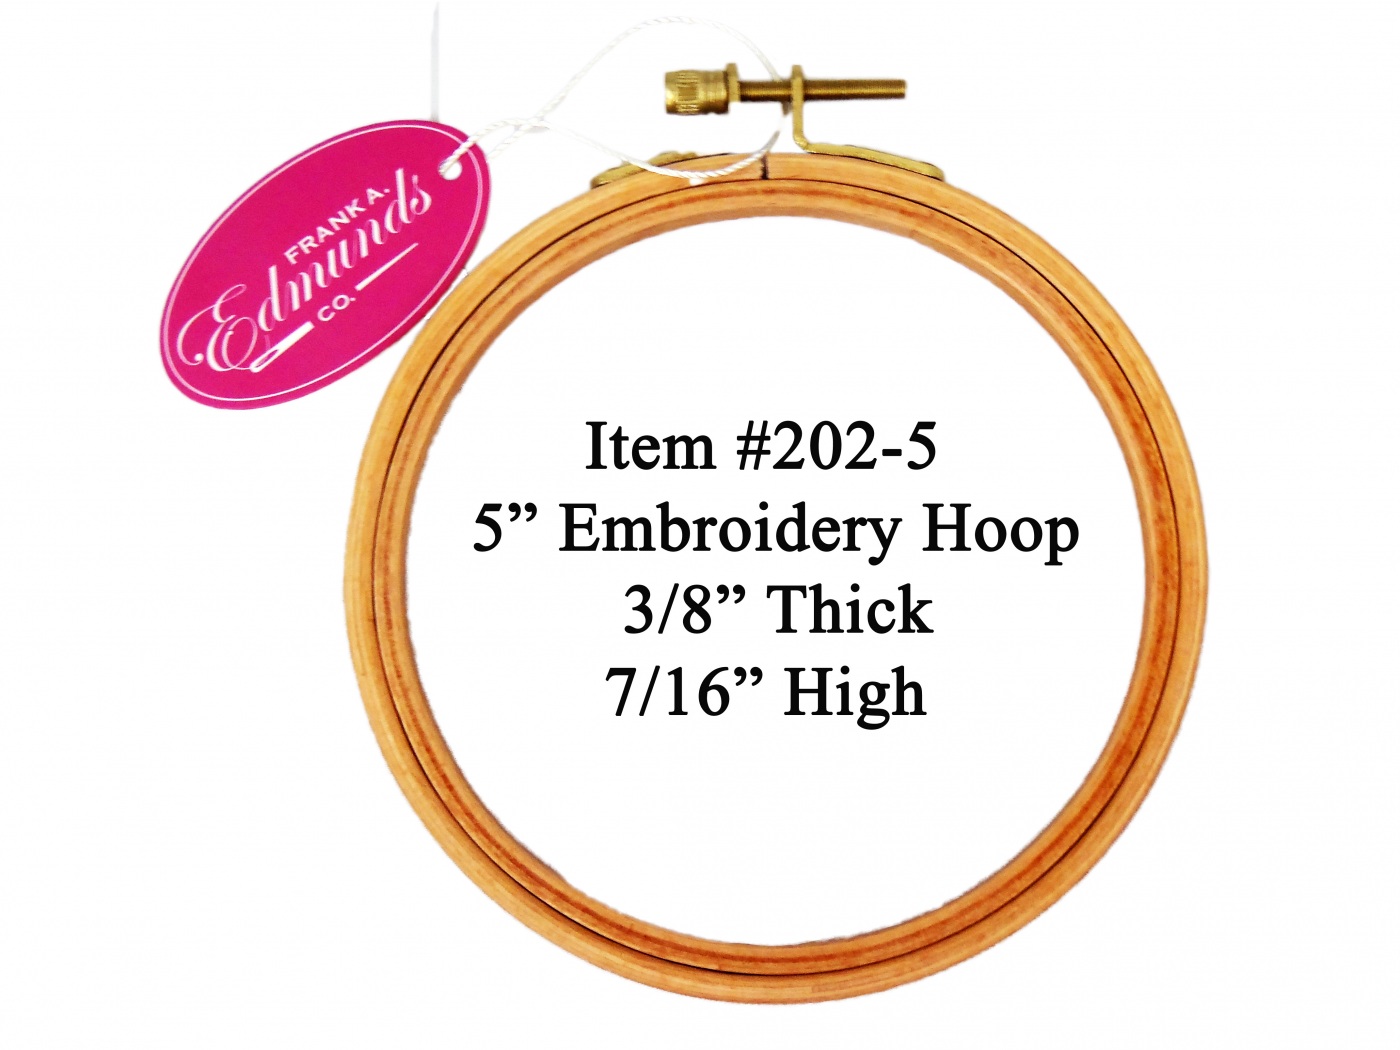 Frank Edmunds & Co. Square 8 Embroidery Hoop Accessory